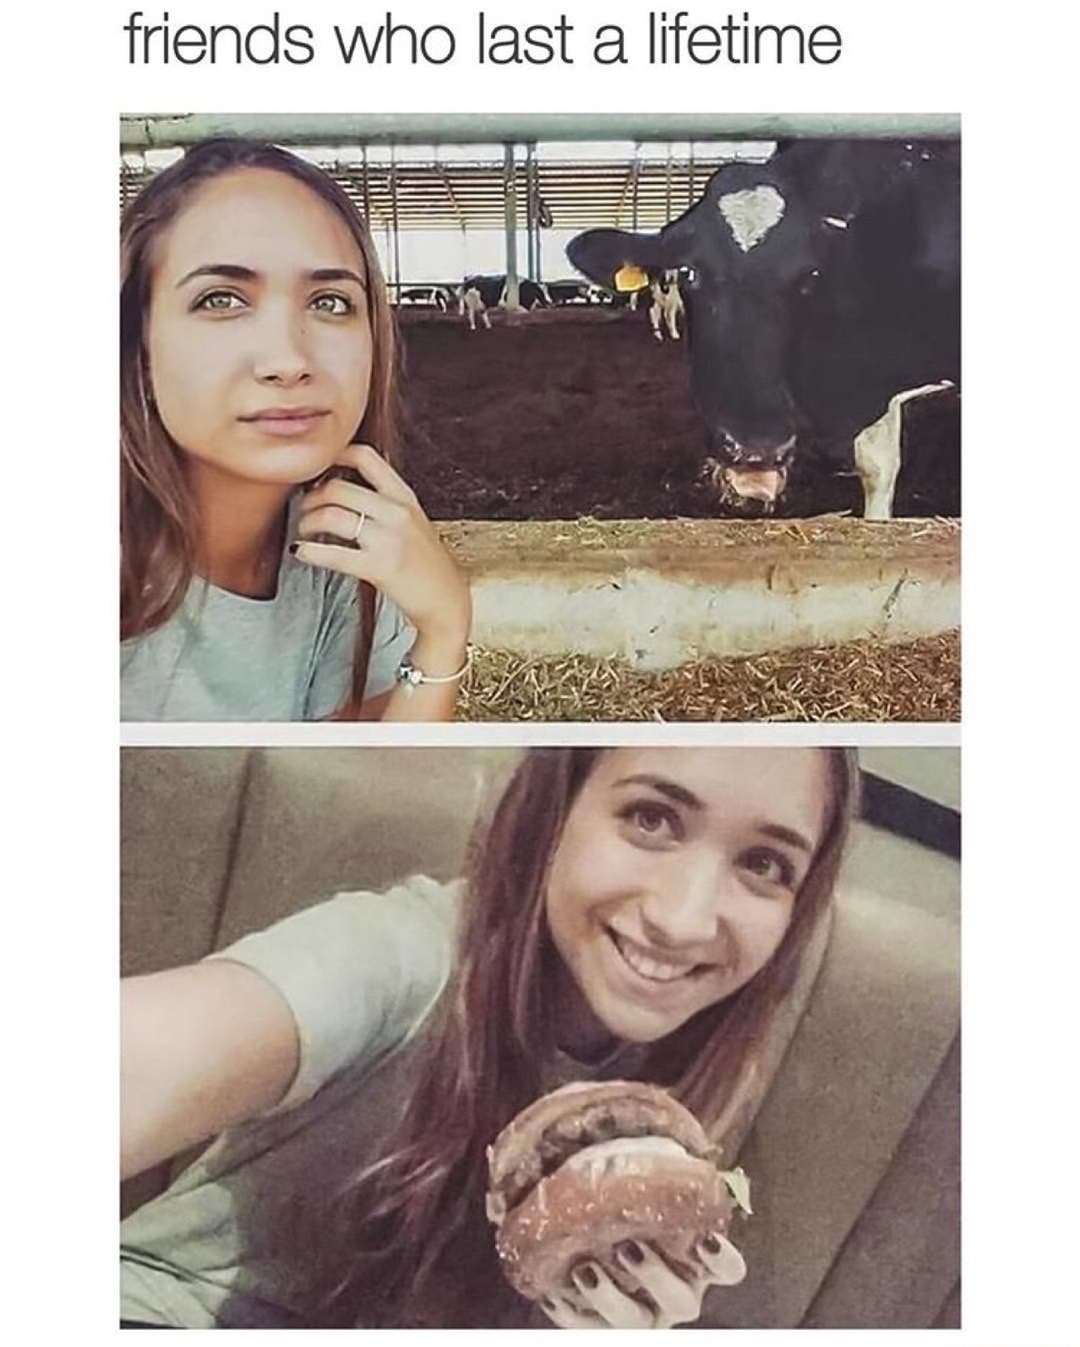 Friends who last a lifetime meme of woman taking selfie by a cow, and then selfie eating a hamburger.